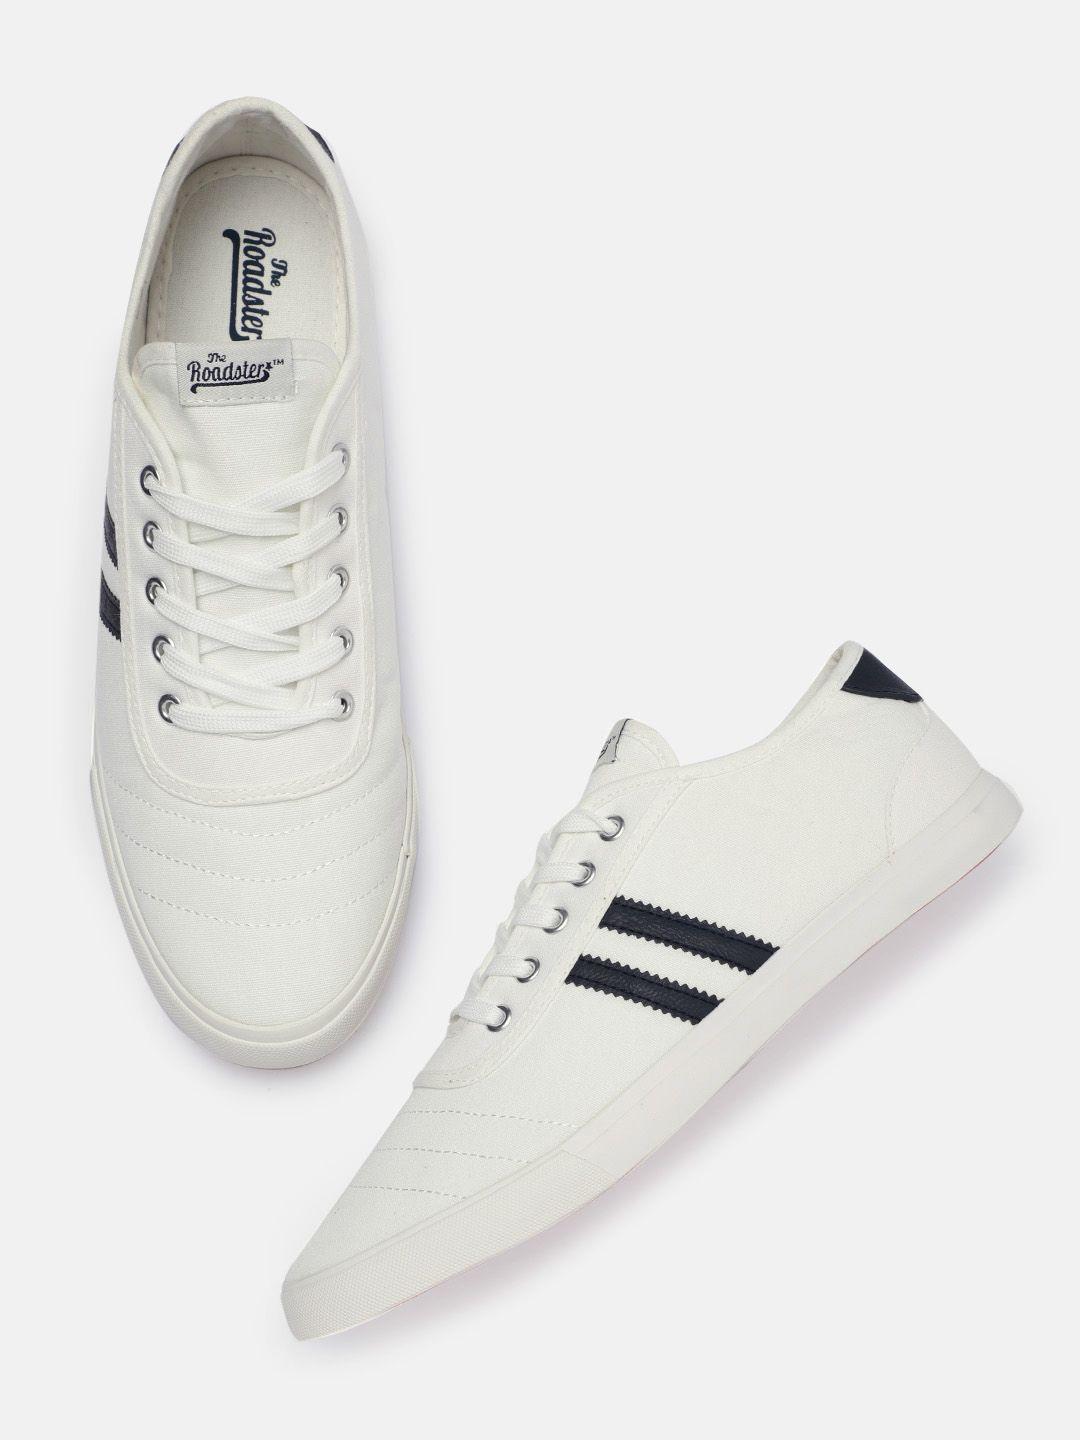 the roadster lifestyle co men white solid sneakers